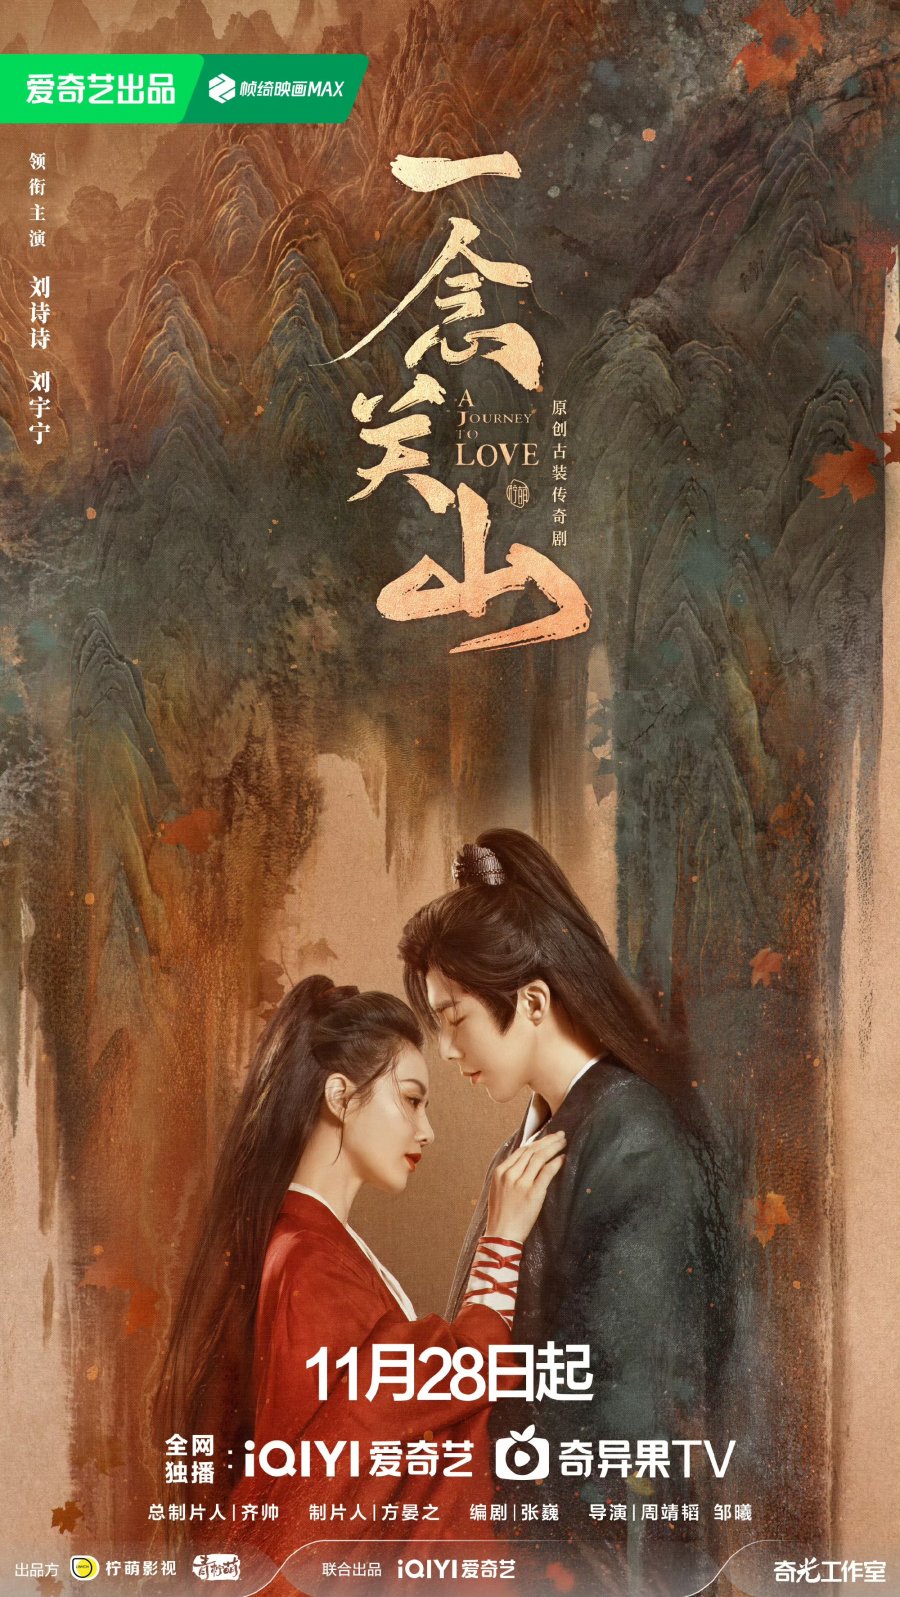 image poster from imdb, mydramalist - ​A Journey to Love (2023)